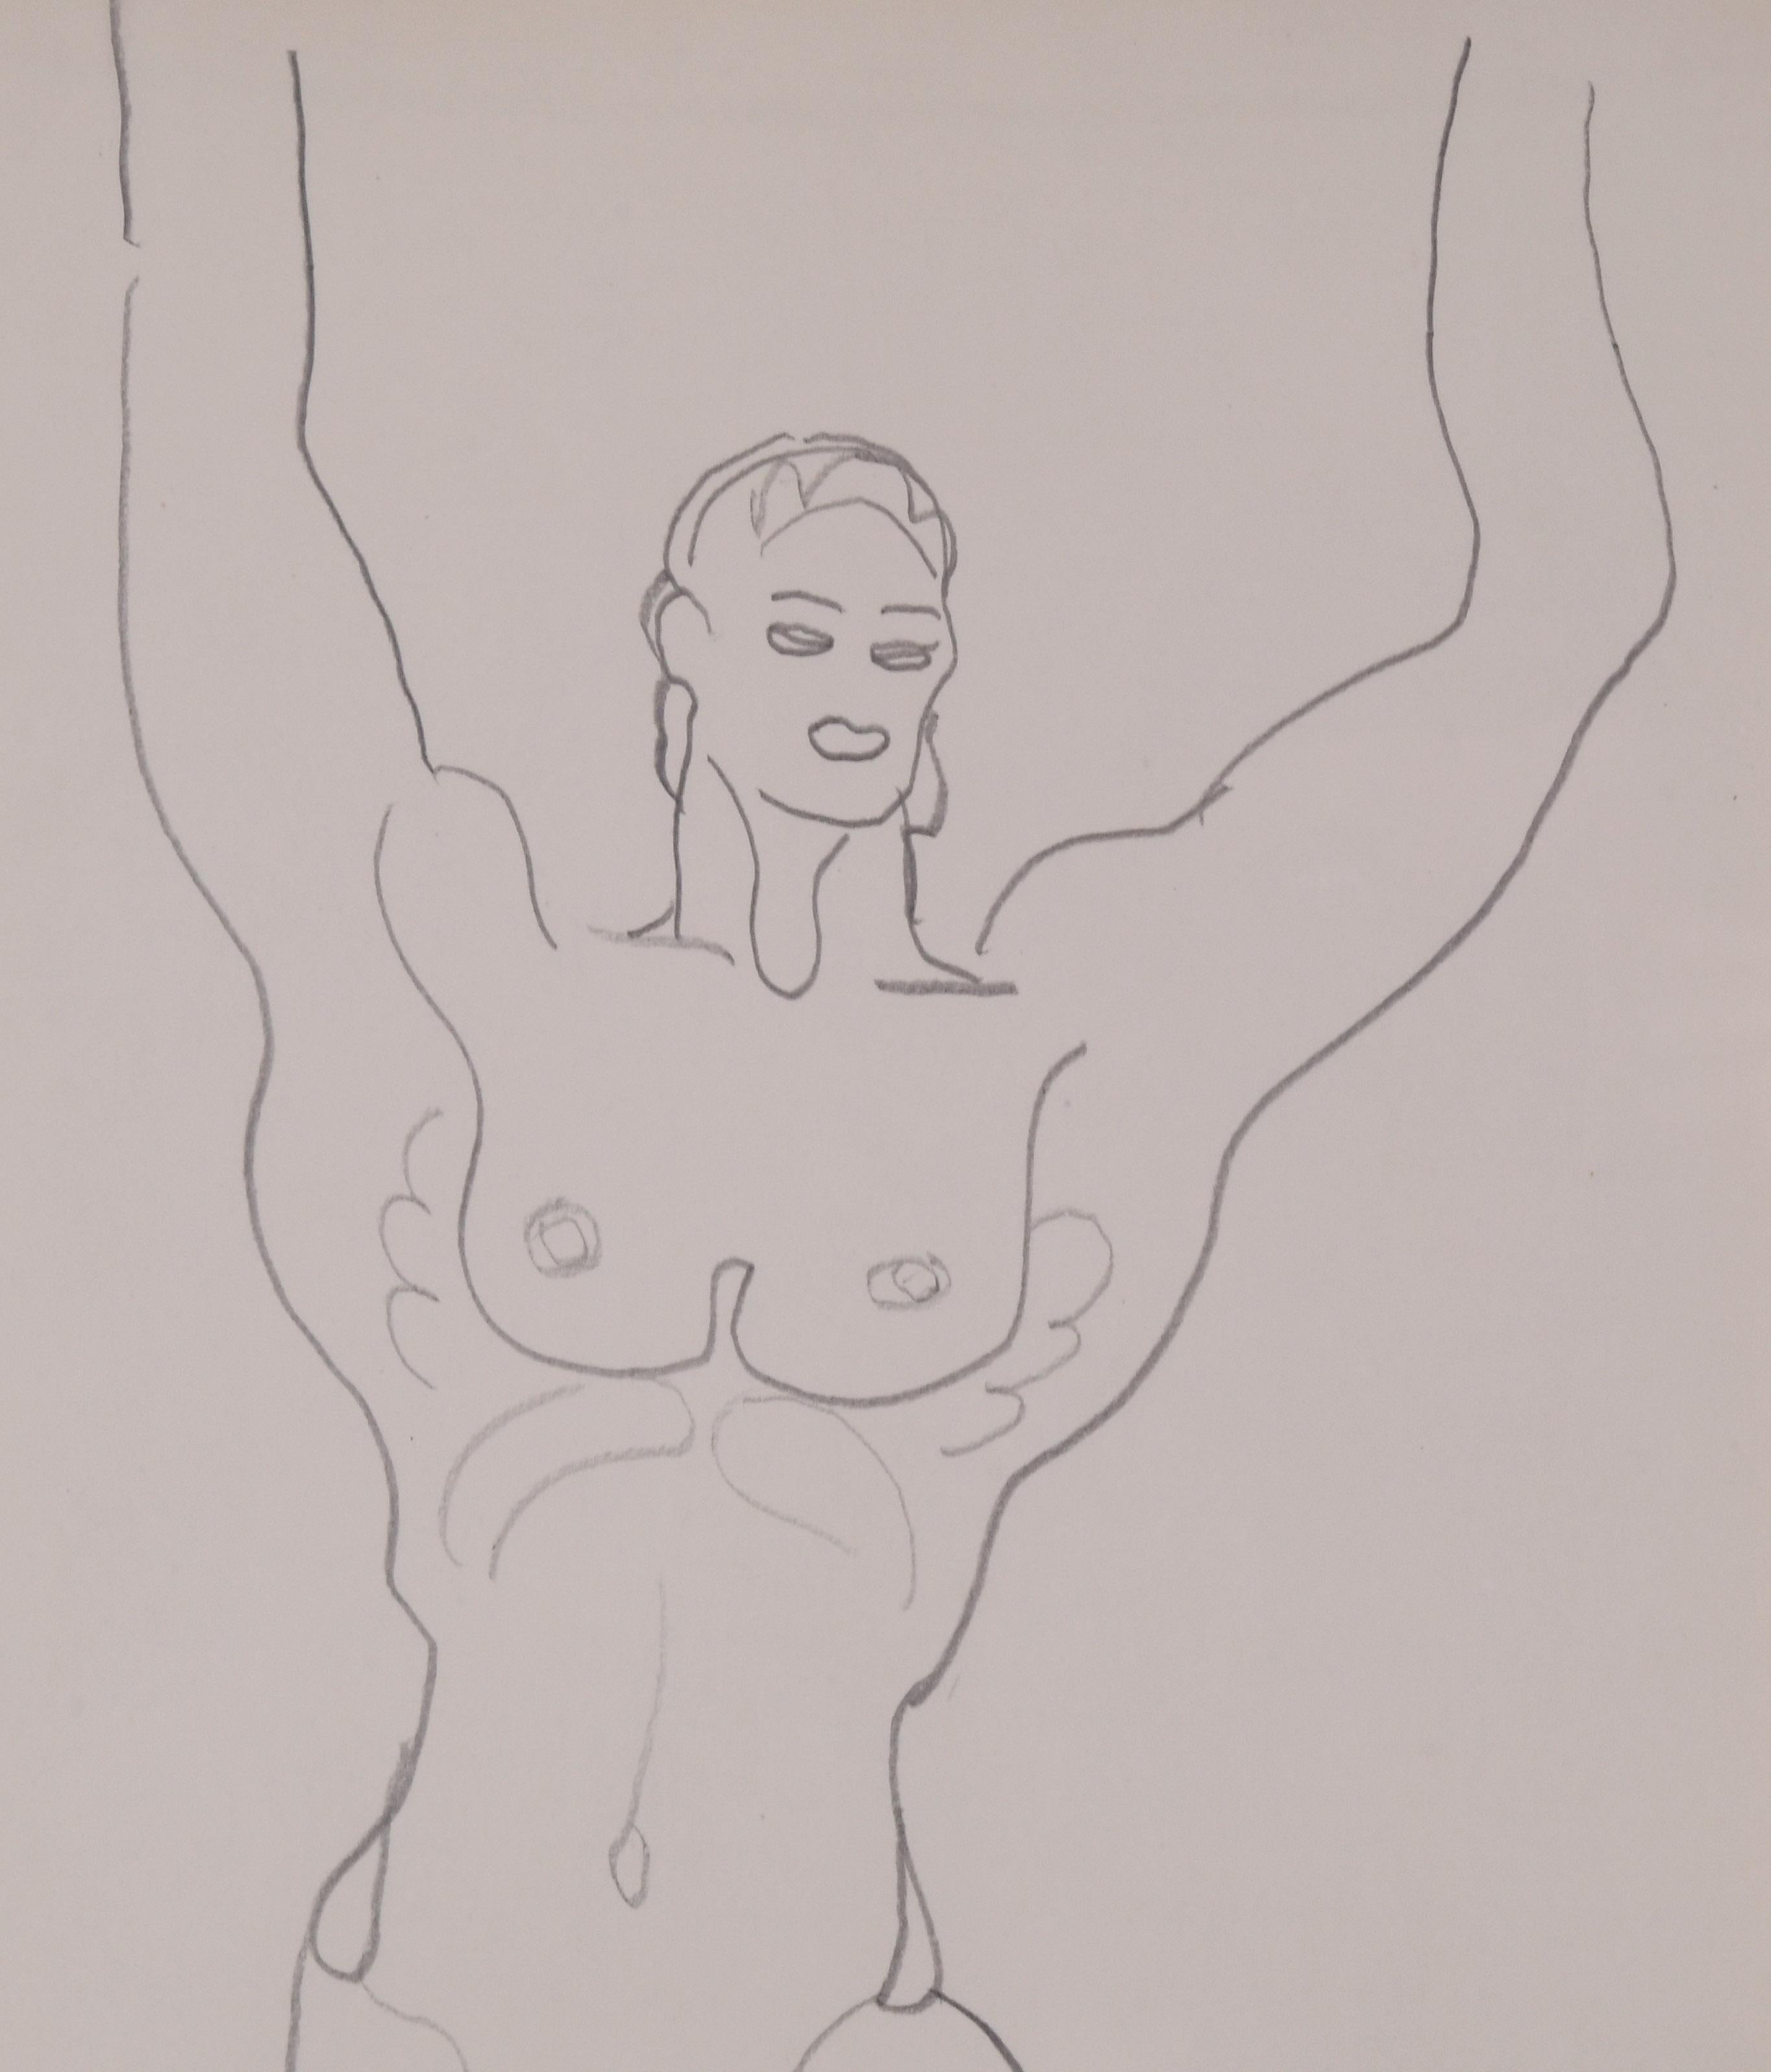 Standing Male Nude, Arms upraised (Kouros)
Graphite on wove paper, c. 1930
Signed lower right (see photo)
Possibly exhibited in May 8-June 1,1973 at Alan Stone Gallery entitled Erotica, which lists Lachaise as one of the artists exhibited. 
Part of